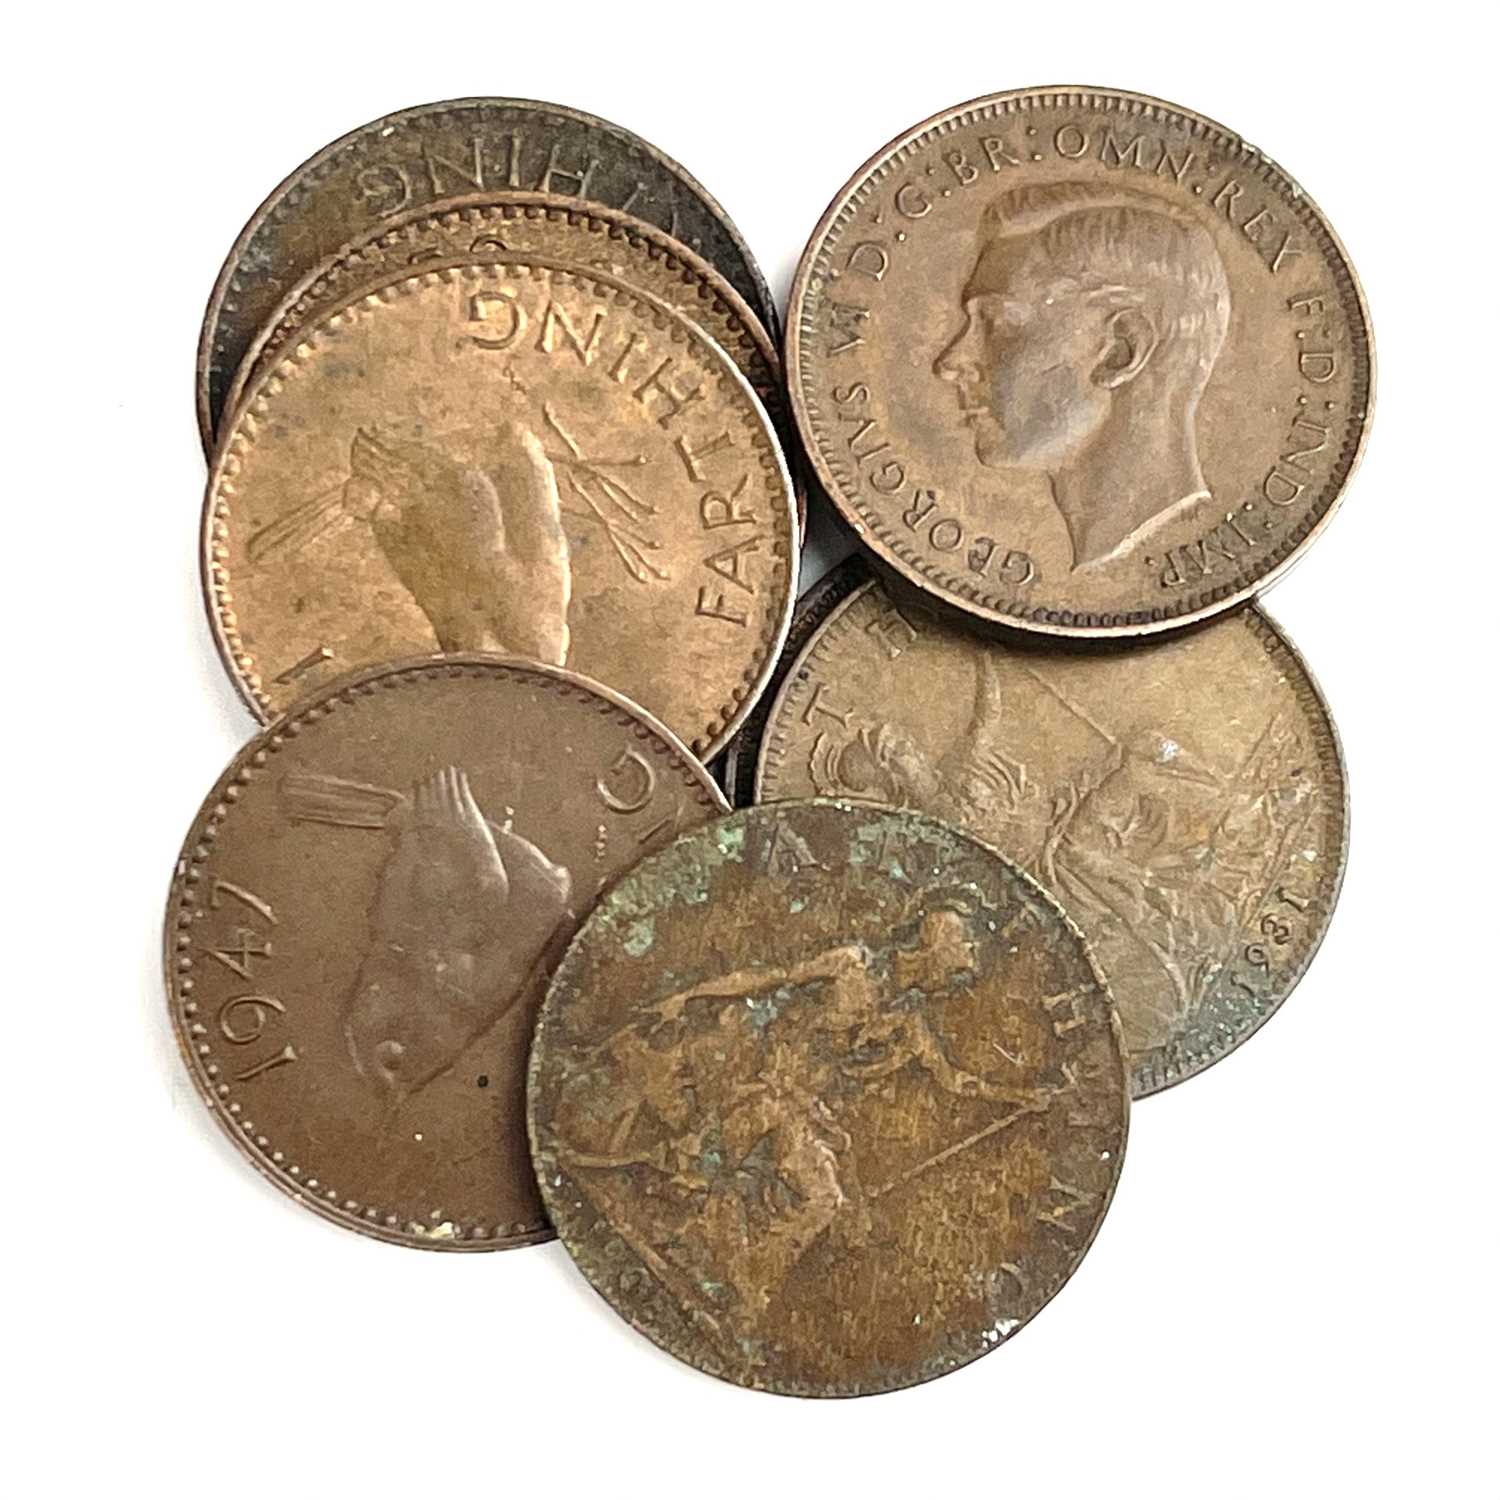 British Coinage. Lot includes approximately £1 of pre 1947 G.B silver coinage plus various other - Image 9 of 10